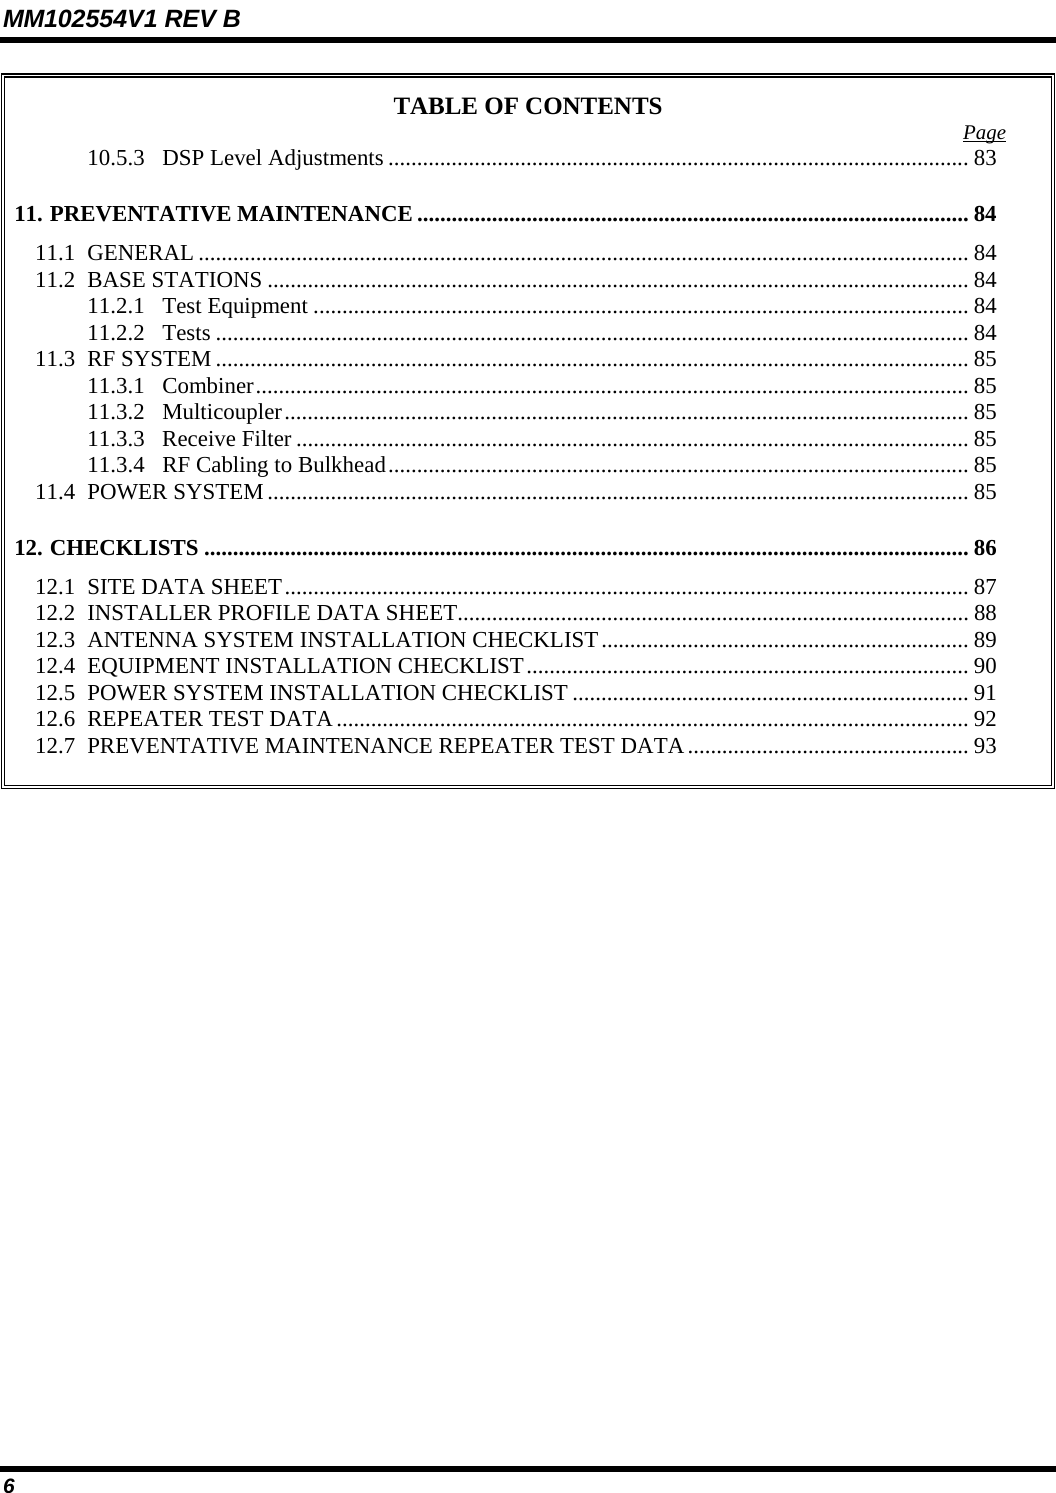 MM102554V1 REV B 6   TABLE OF CONTENTS  Page 10.5.3  DSP Level Adjustments ..................................................................................................... 83 11. PREVENTATIVE MAINTENANCE ................................................................................................ 84 11.1 GENERAL ...................................................................................................................................... 84 11.2 BASE STATIONS .......................................................................................................................... 84 11.2.1 Test Equipment .................................................................................................................. 84 11.2.2 Tests ................................................................................................................................... 84 11.3 RF SYSTEM ................................................................................................................................... 85 11.3.1 Combiner............................................................................................................................ 85 11.3.2 Multicoupler....................................................................................................................... 85 11.3.3 Receive Filter ..................................................................................................................... 85 11.3.4  RF Cabling to Bulkhead..................................................................................................... 85 11.4 POWER SYSTEM .......................................................................................................................... 85 12. CHECKLISTS ..................................................................................................................................... 86 12.1  SITE DATA SHEET....................................................................................................................... 87 12.2  INSTALLER PROFILE DATA SHEET......................................................................................... 88 12.3  ANTENNA SYSTEM INSTALLATION CHECKLIST................................................................ 89 12.4  EQUIPMENT INSTALLATION CHECKLIST............................................................................. 90 12.5  POWER SYSTEM INSTALLATION CHECKLIST ..................................................................... 91 12.6  REPEATER TEST DATA .............................................................................................................. 92 12.7  PREVENTATIVE MAINTENANCE REPEATER TEST DATA ................................................. 93     